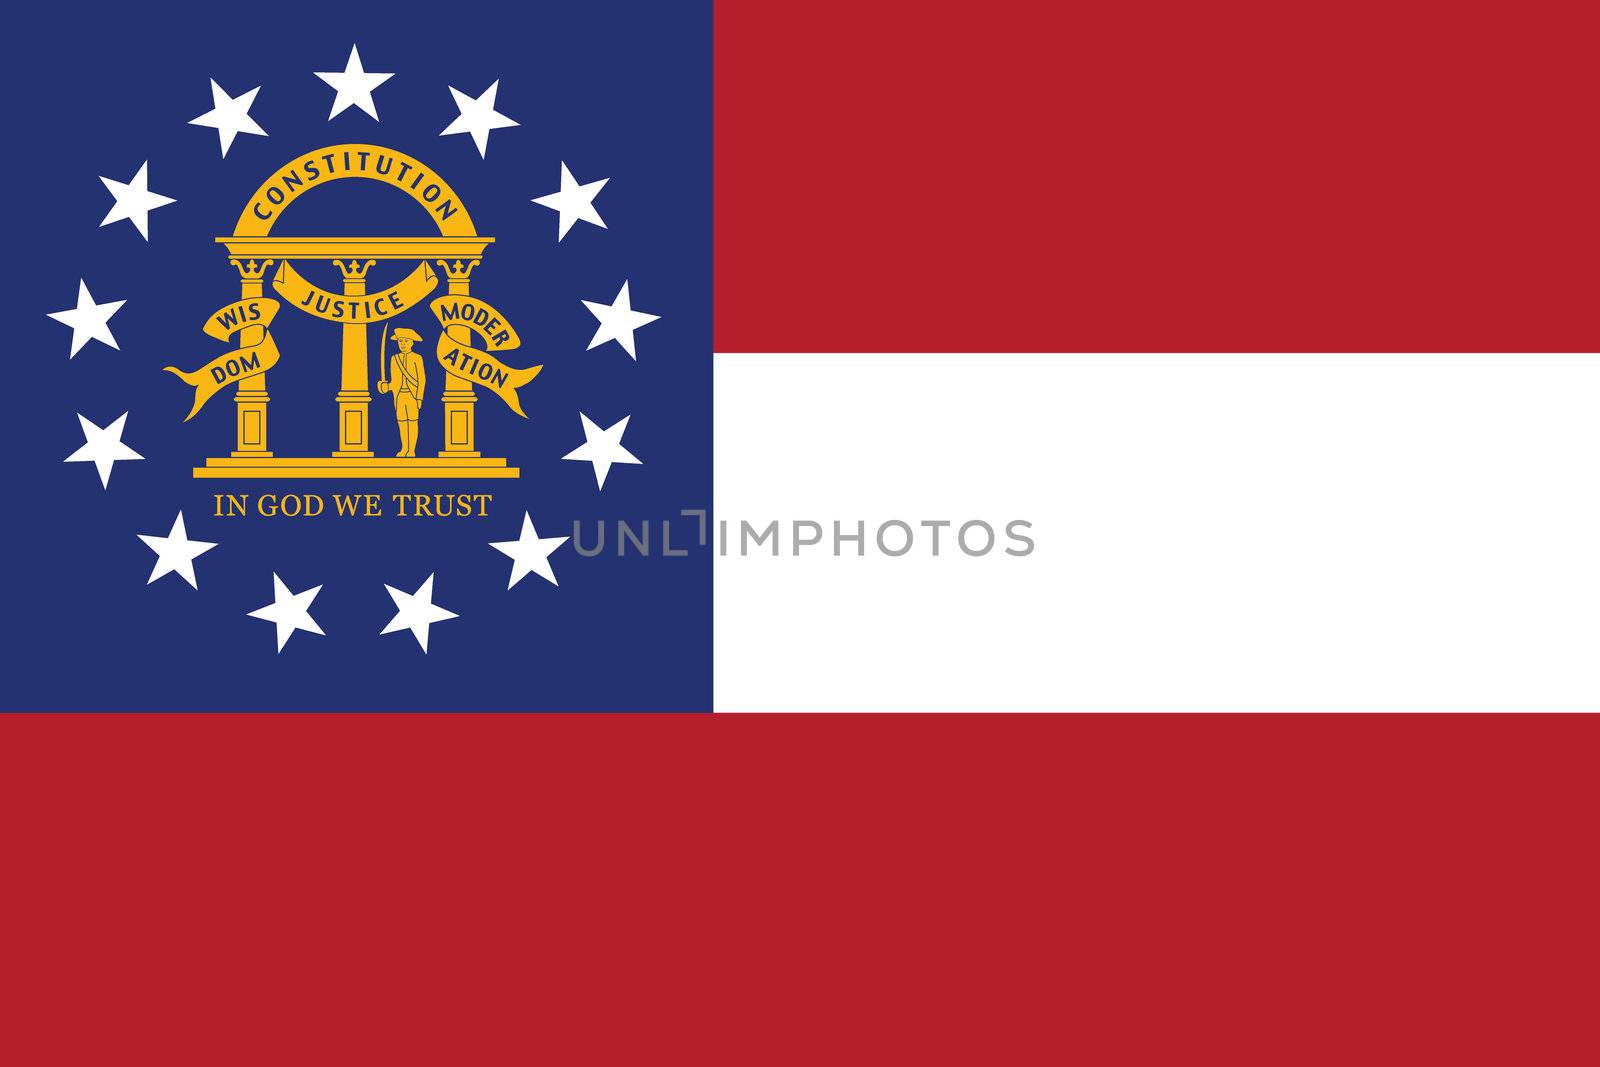 The Flag of the American State of Georgia